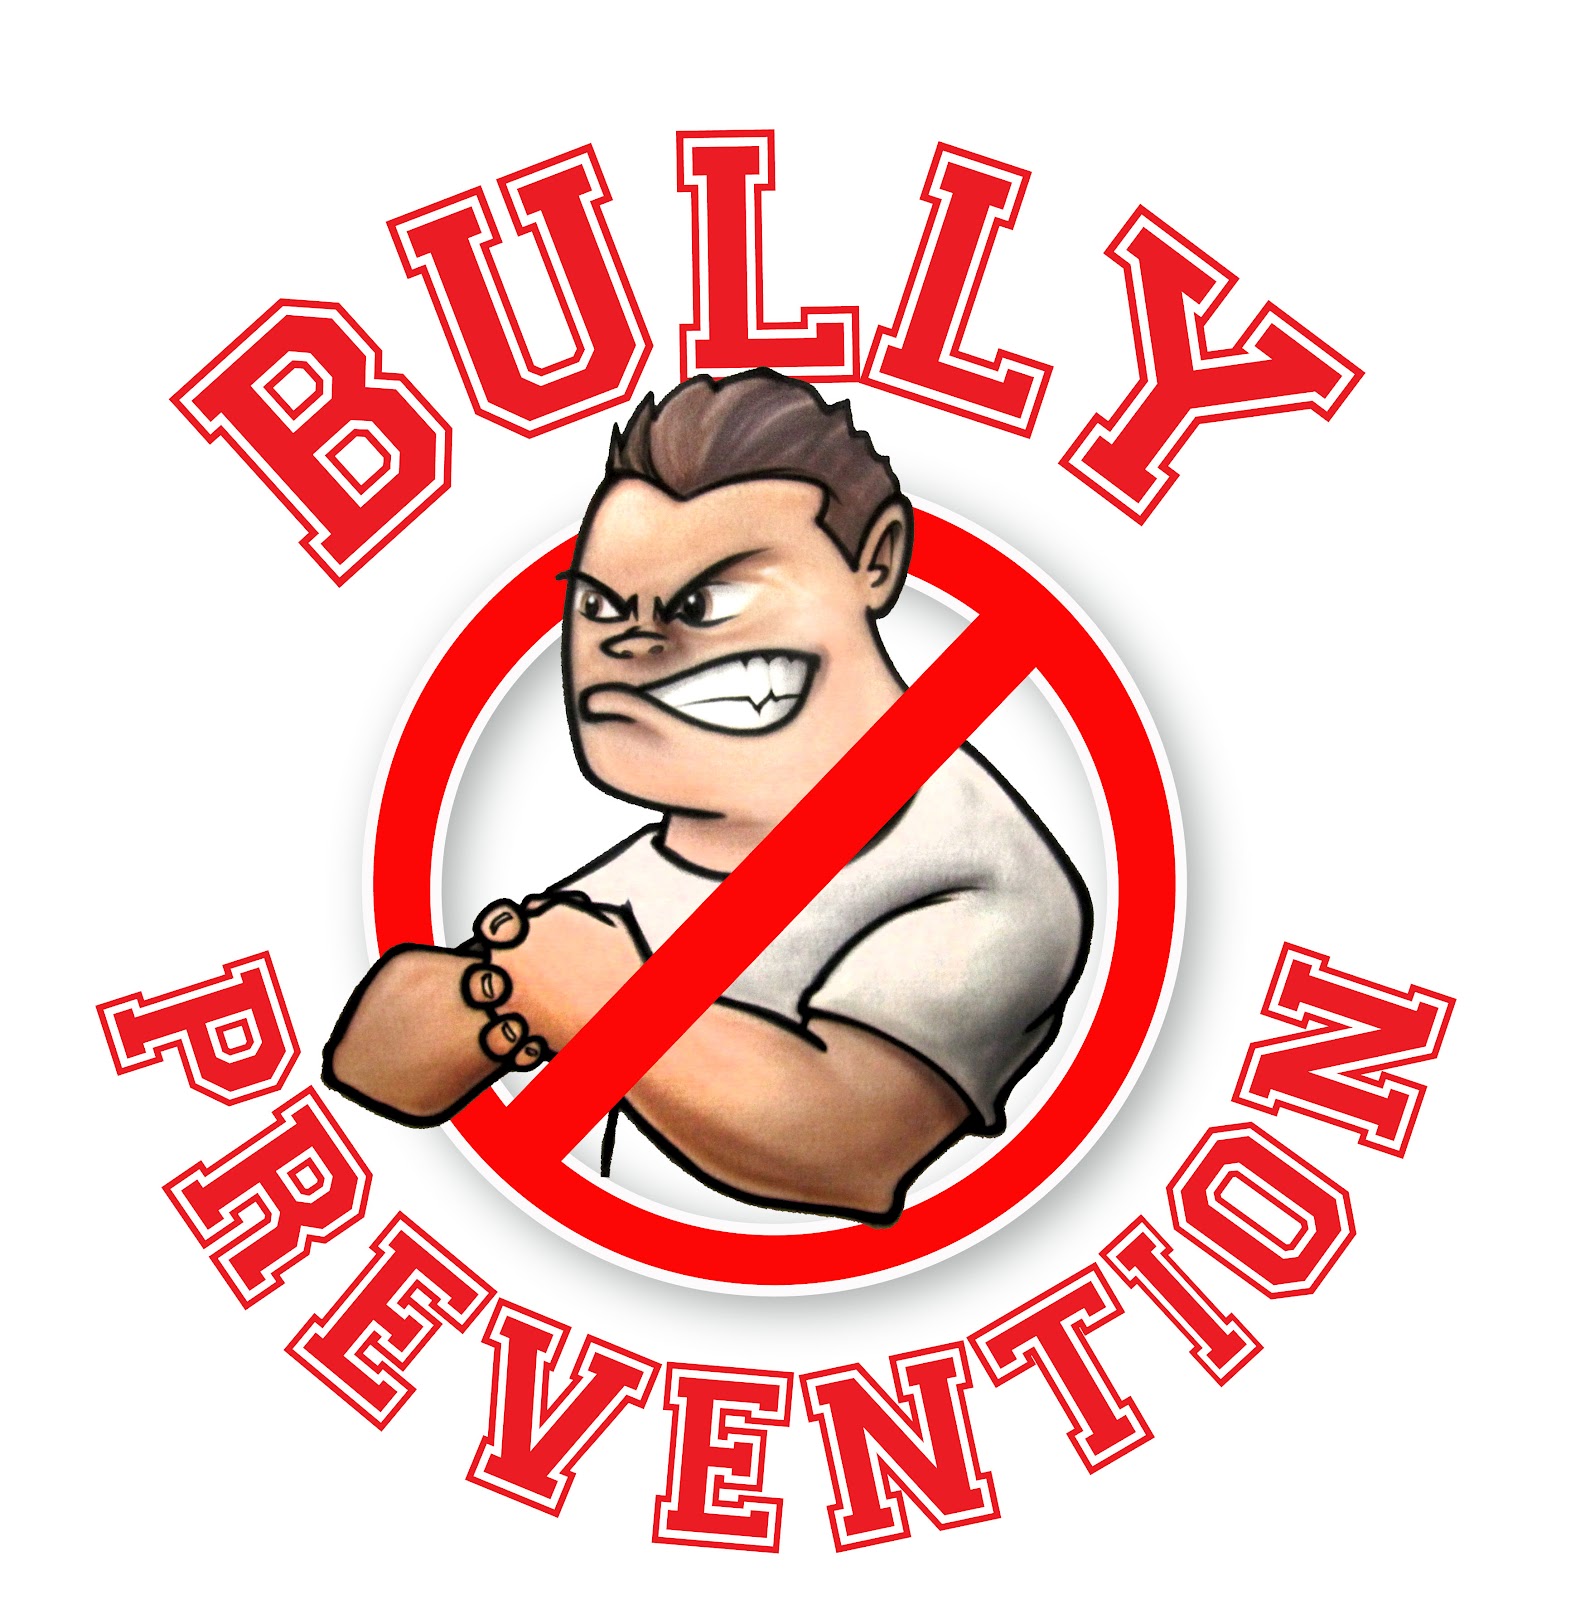 Contoh Poster Anti Bullying For Kids - IMAGESEE